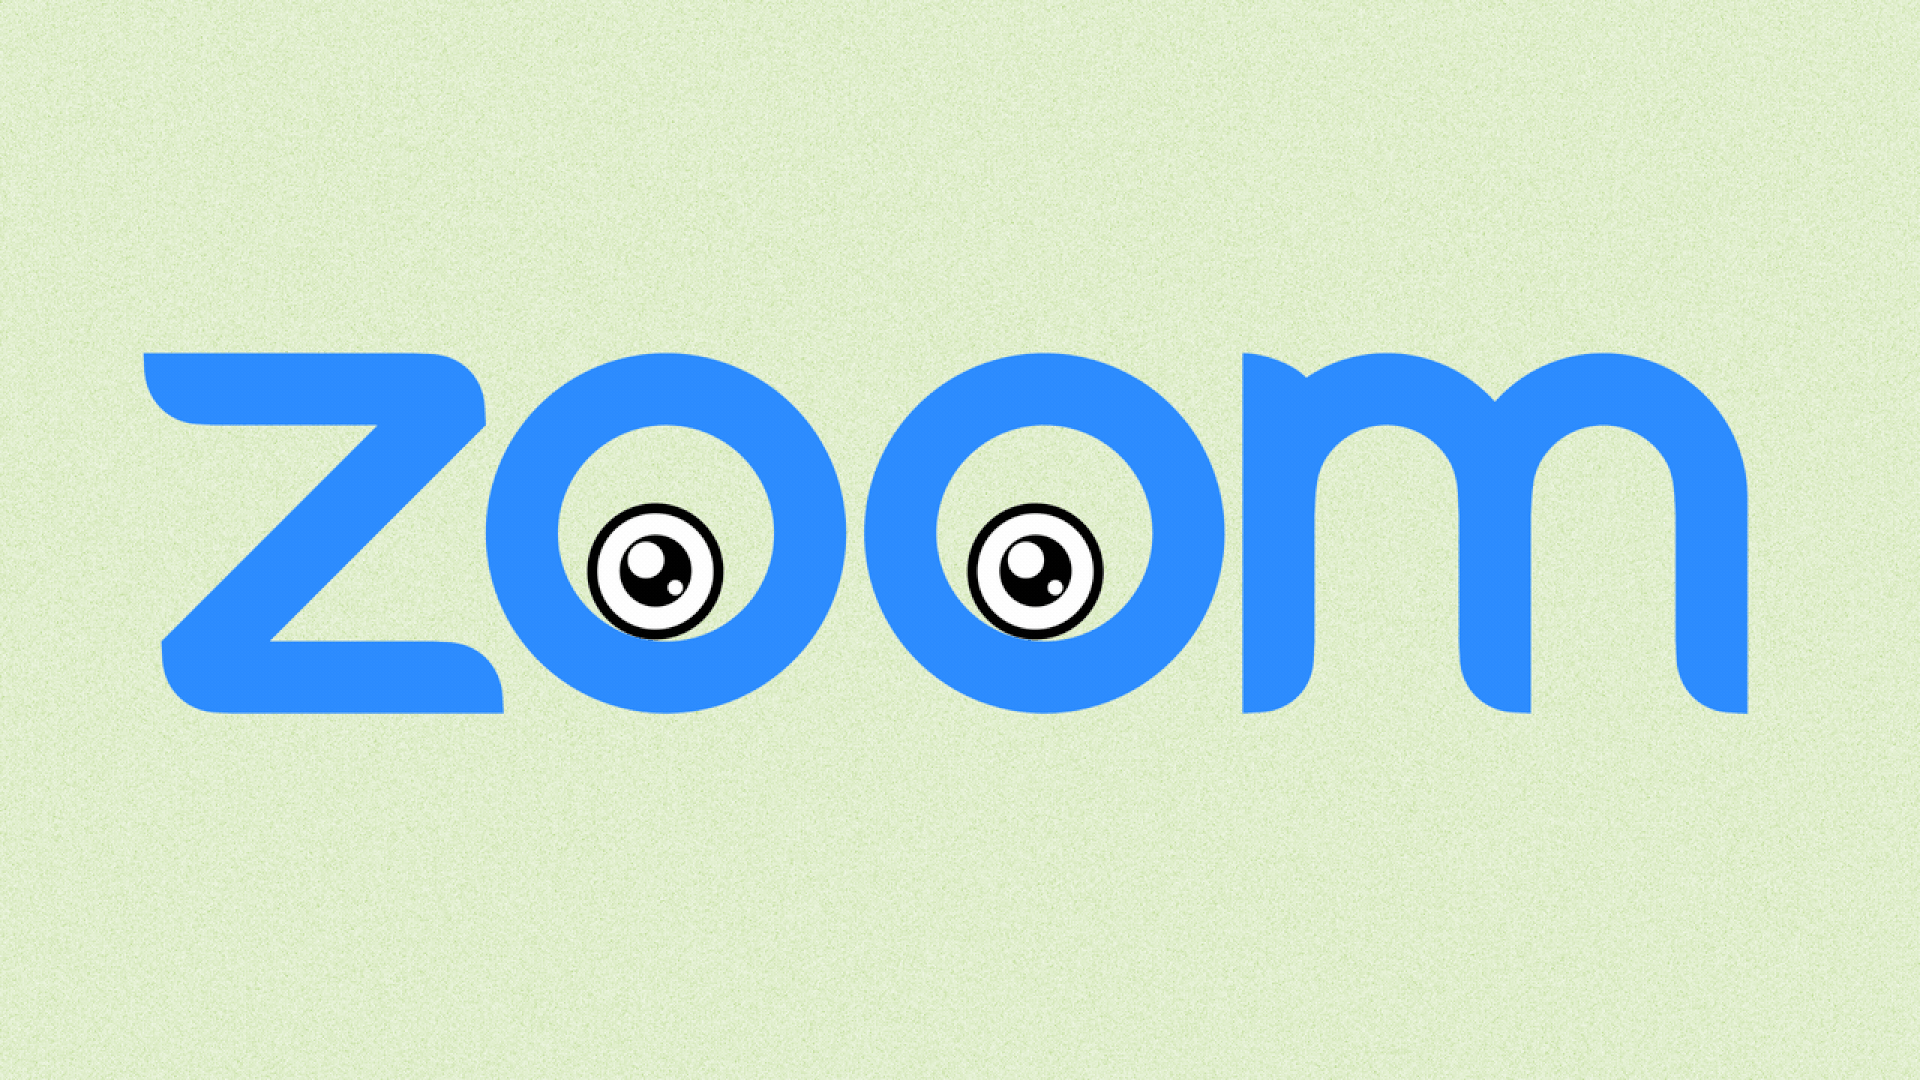 Animated illustration of the Zoom logo with a pair of eyes in the "O's" looking around terrified.